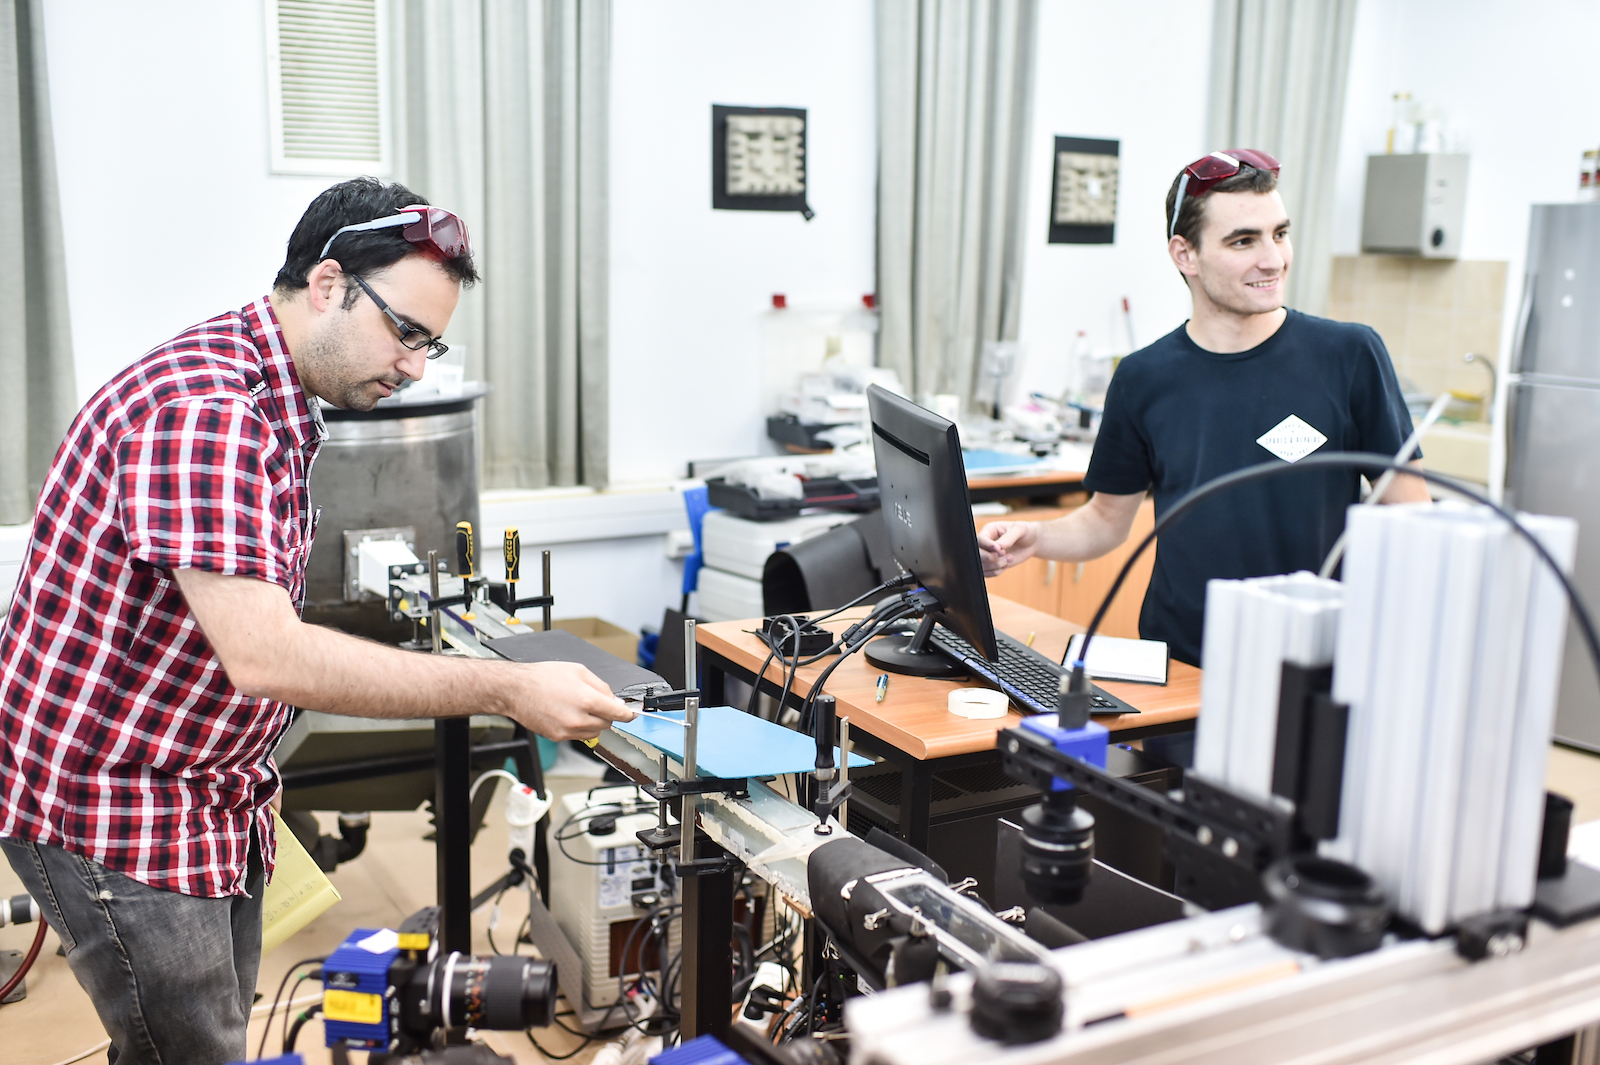 Lior and Dani working on the VIV experiments